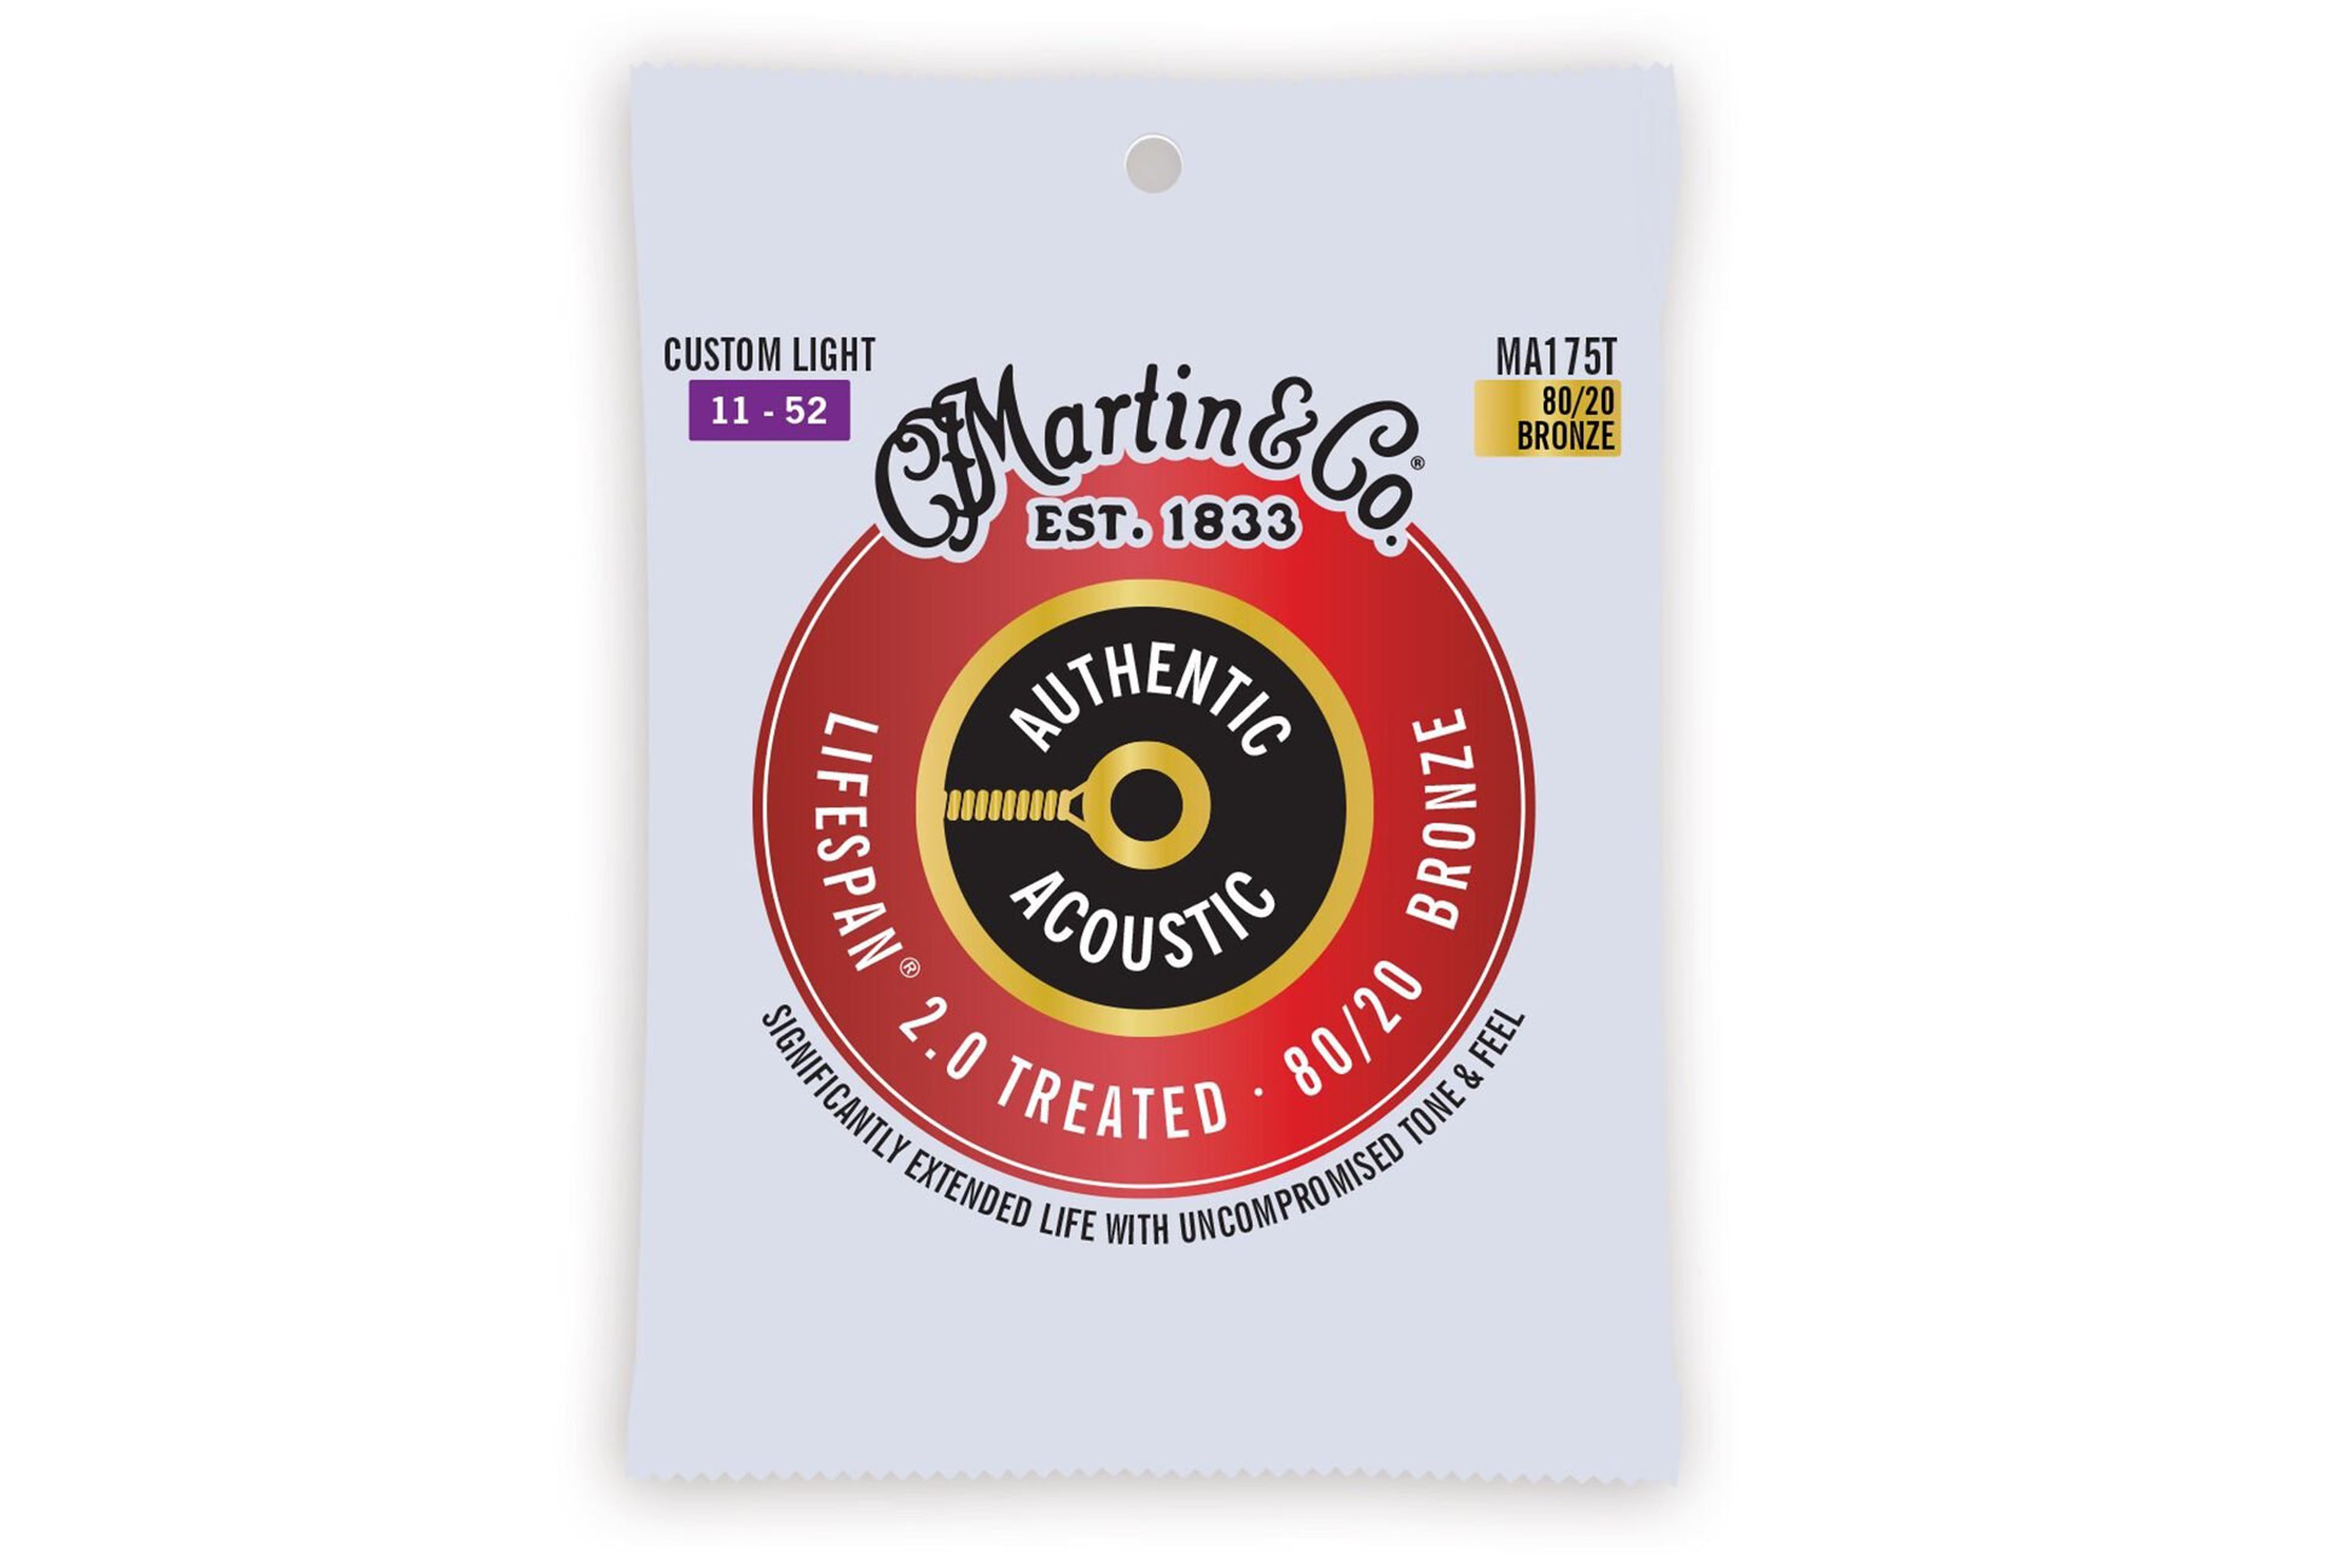 Martin MA140T Authentic Acoustic Lifespan 2.0 Treated 80/20 Bronze Guitar Strings - .012-.054 Light